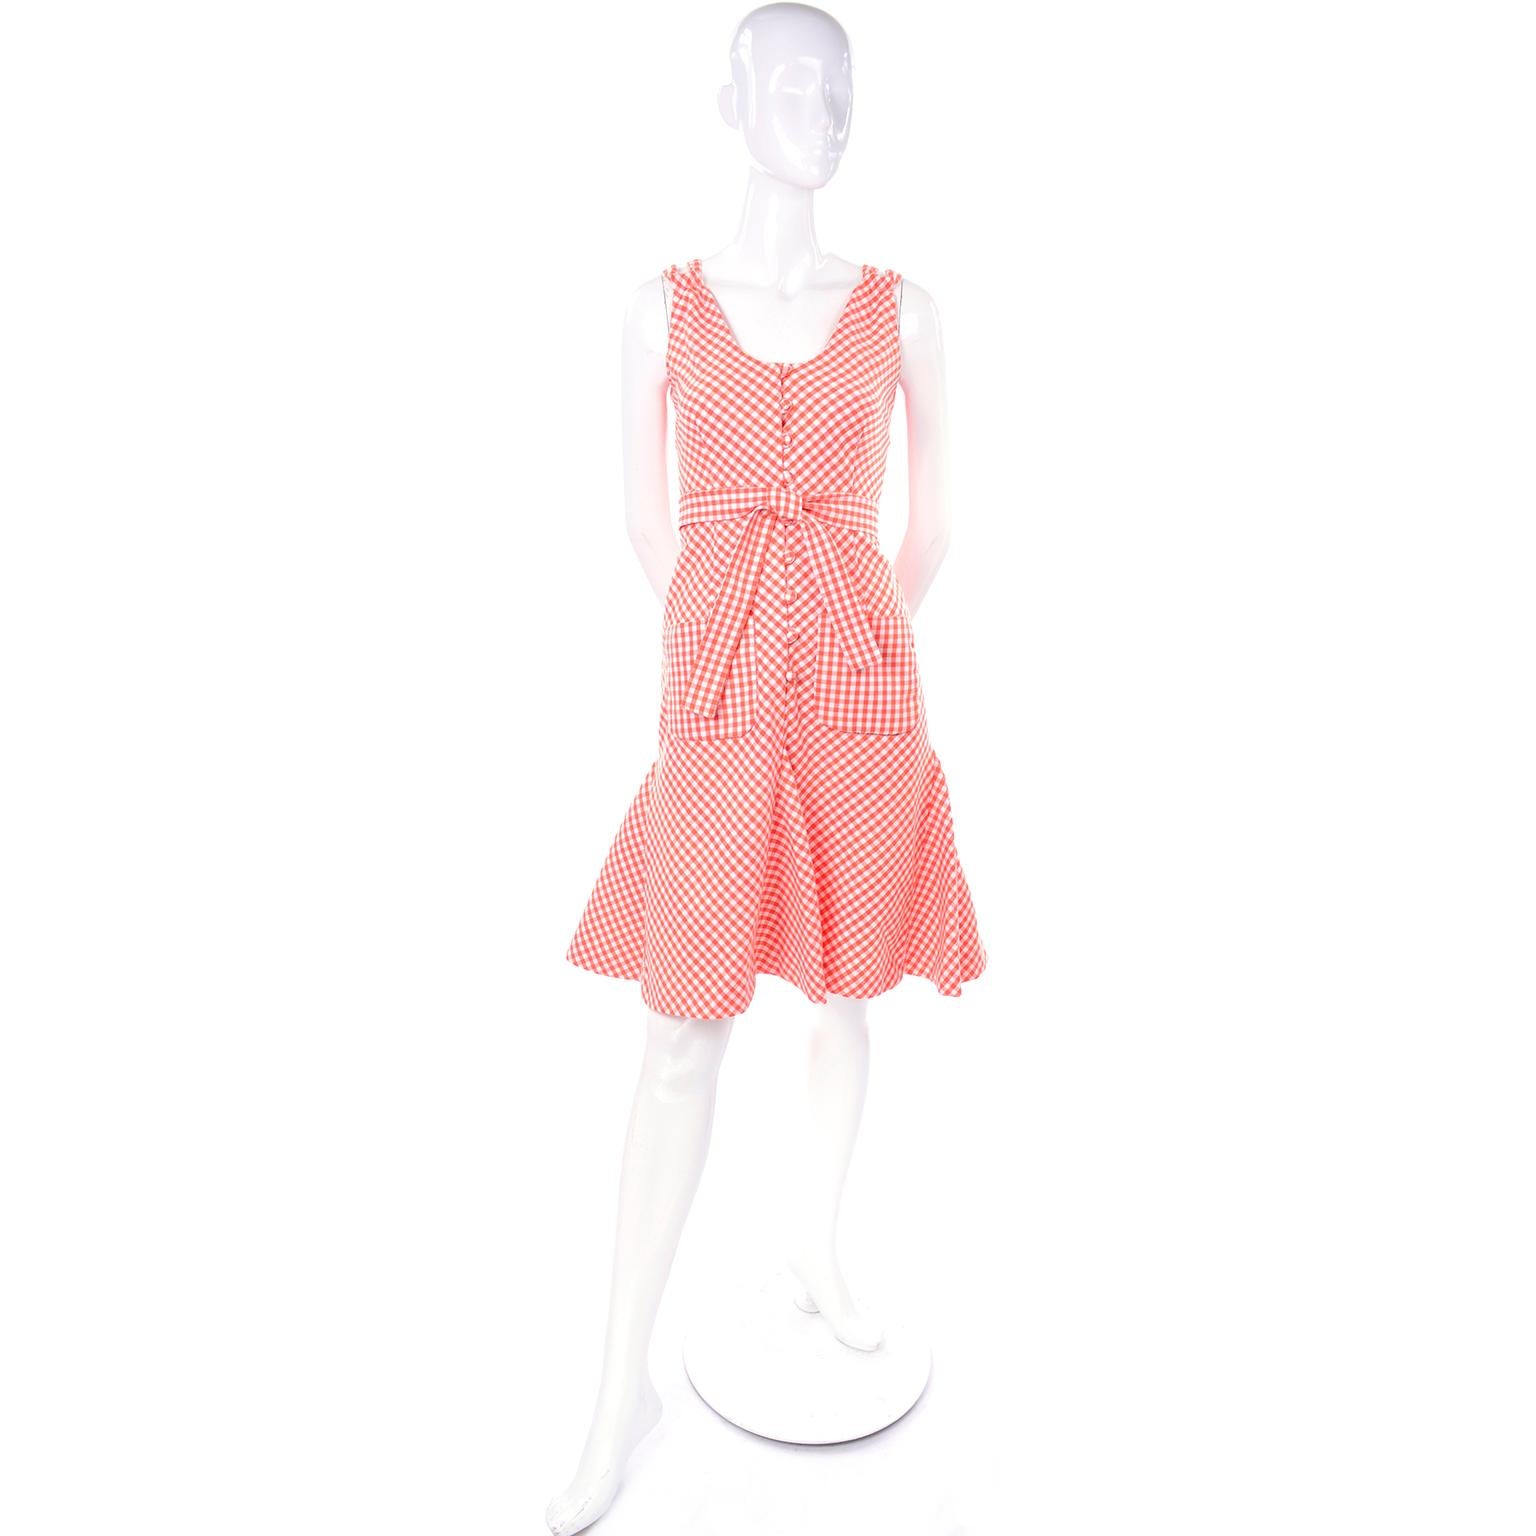 This is such a fun dress designed by Albino Rodrigues. This orange and white gingham  dress has a cross back with double straps and a matching fabric sash or tie that can be worn as a belt or a neck/hair tie. There are two patch pockets at the hips